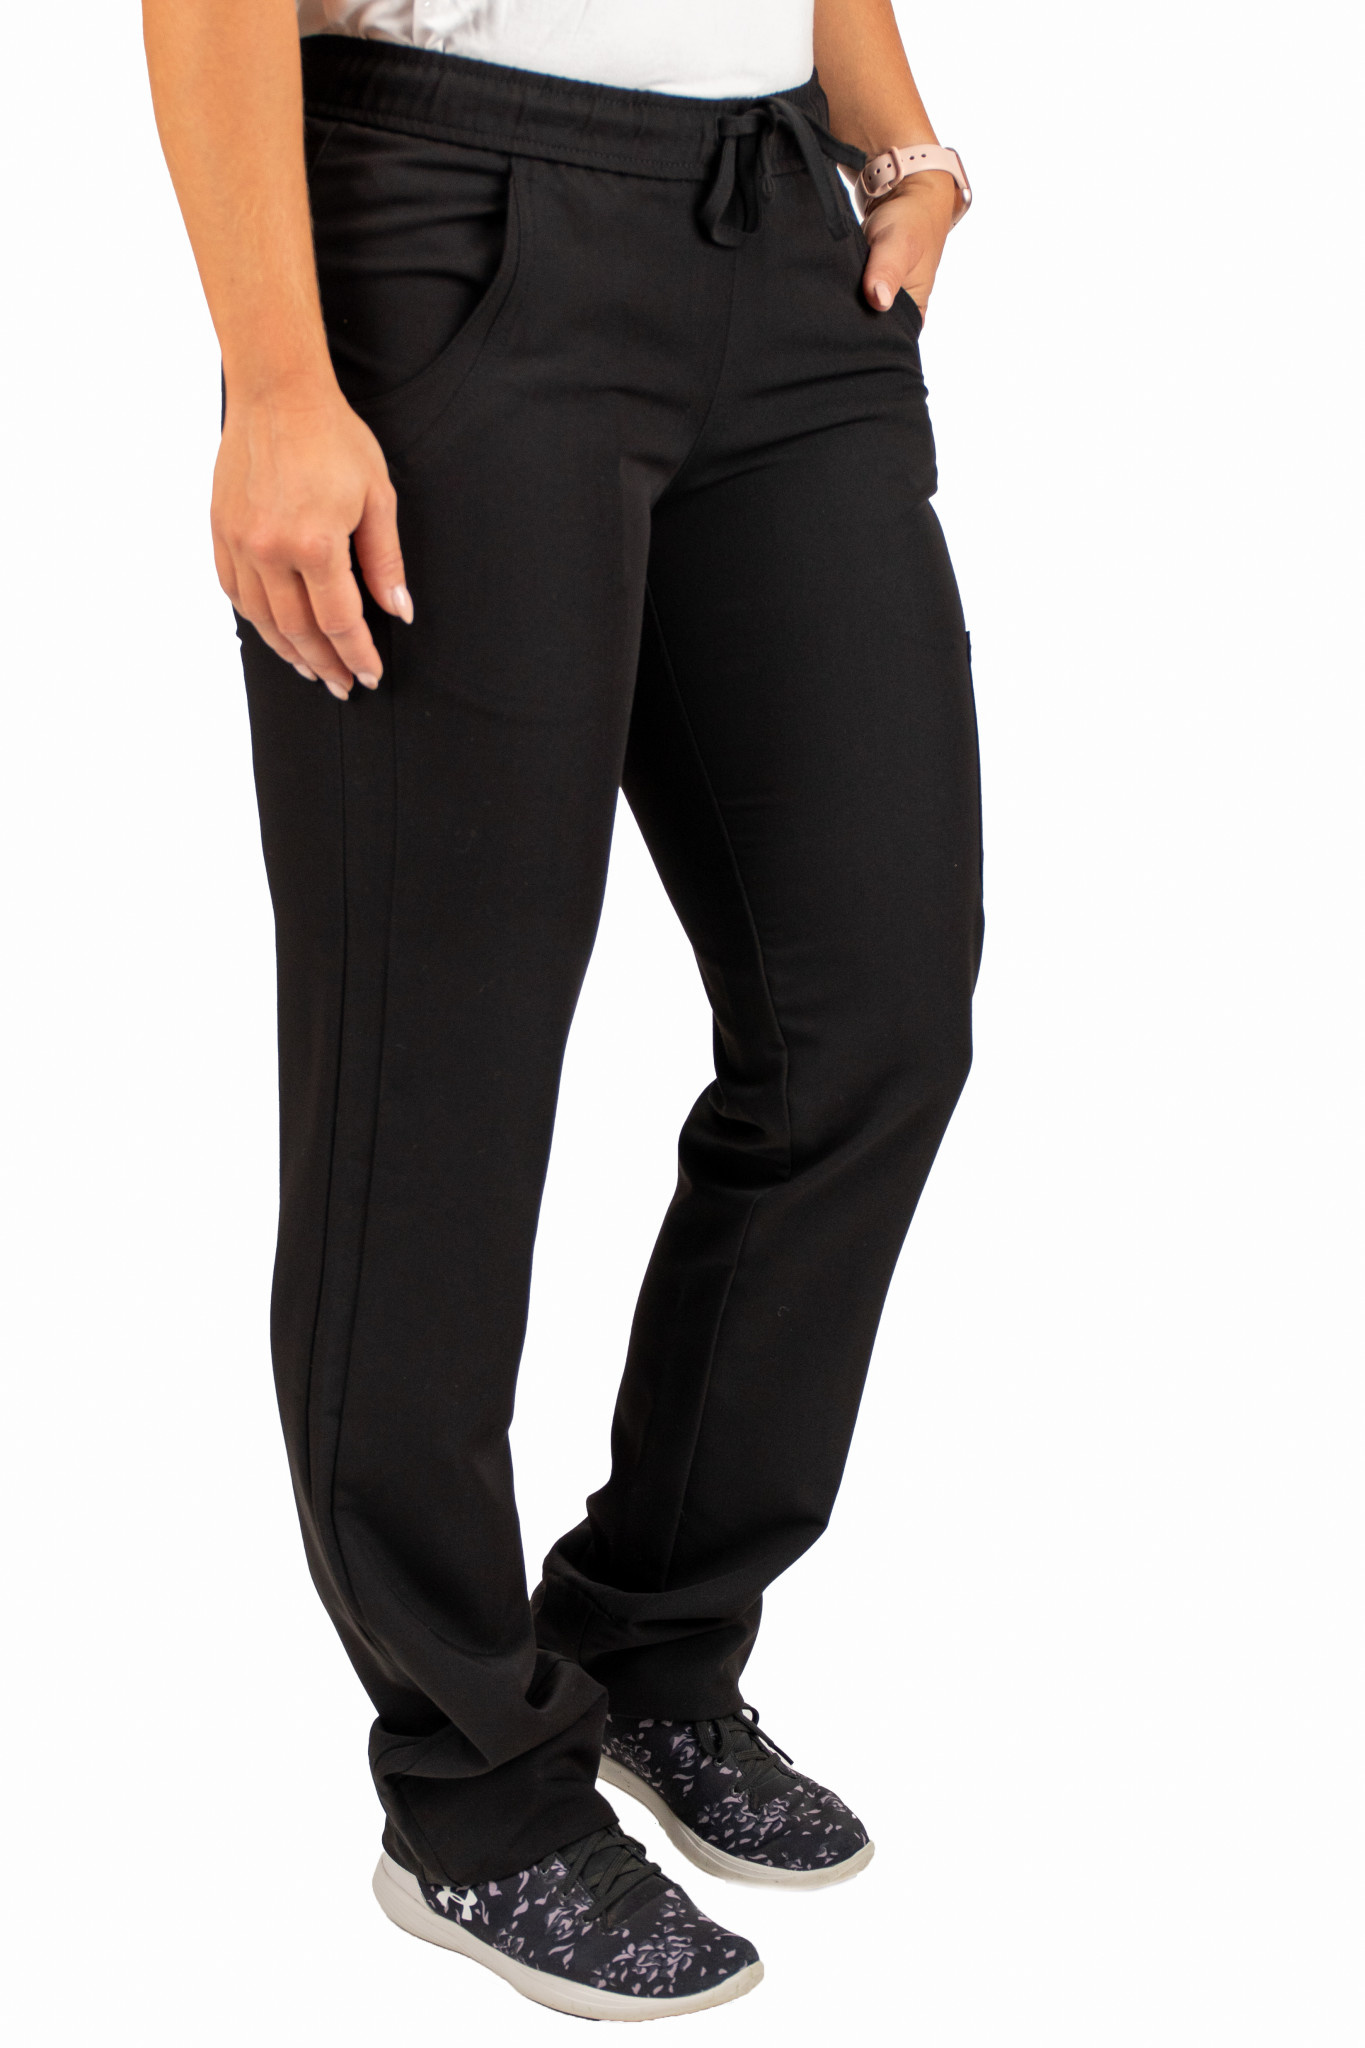 Black Women's Drawstring Waistband Fitted Pants 960